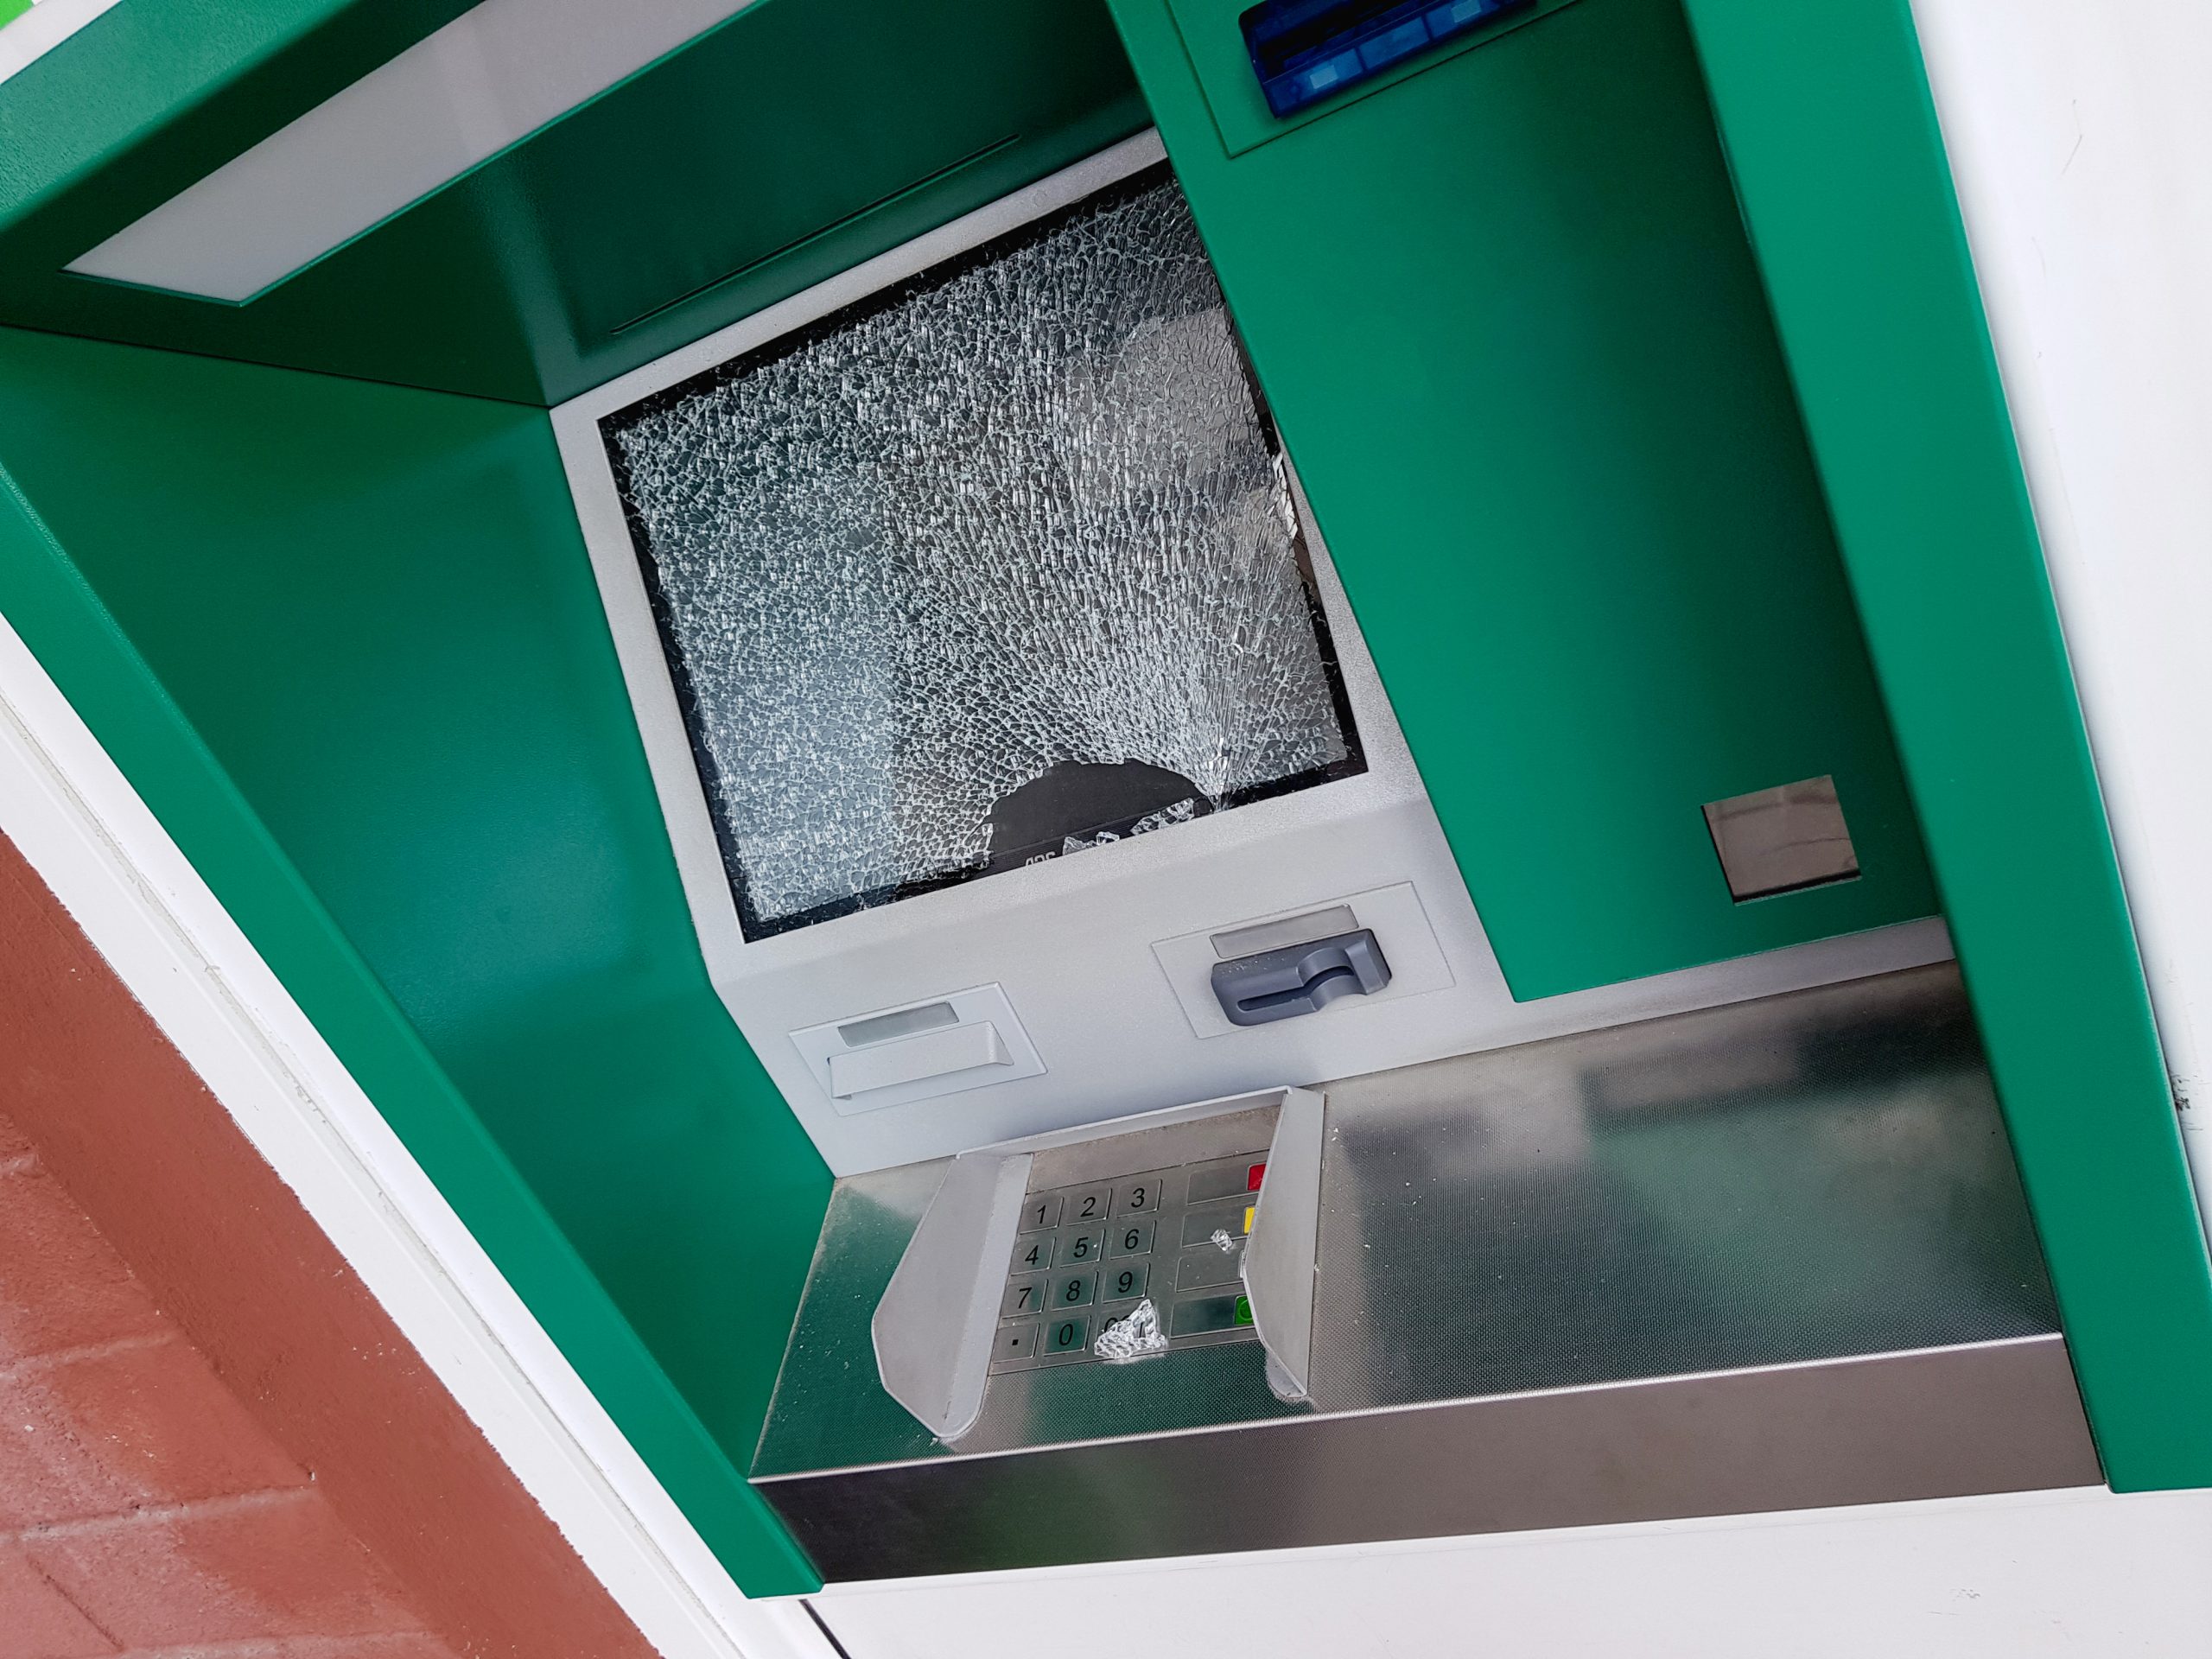 PSNI appeal for witnesses following cash theft from filling station ATM